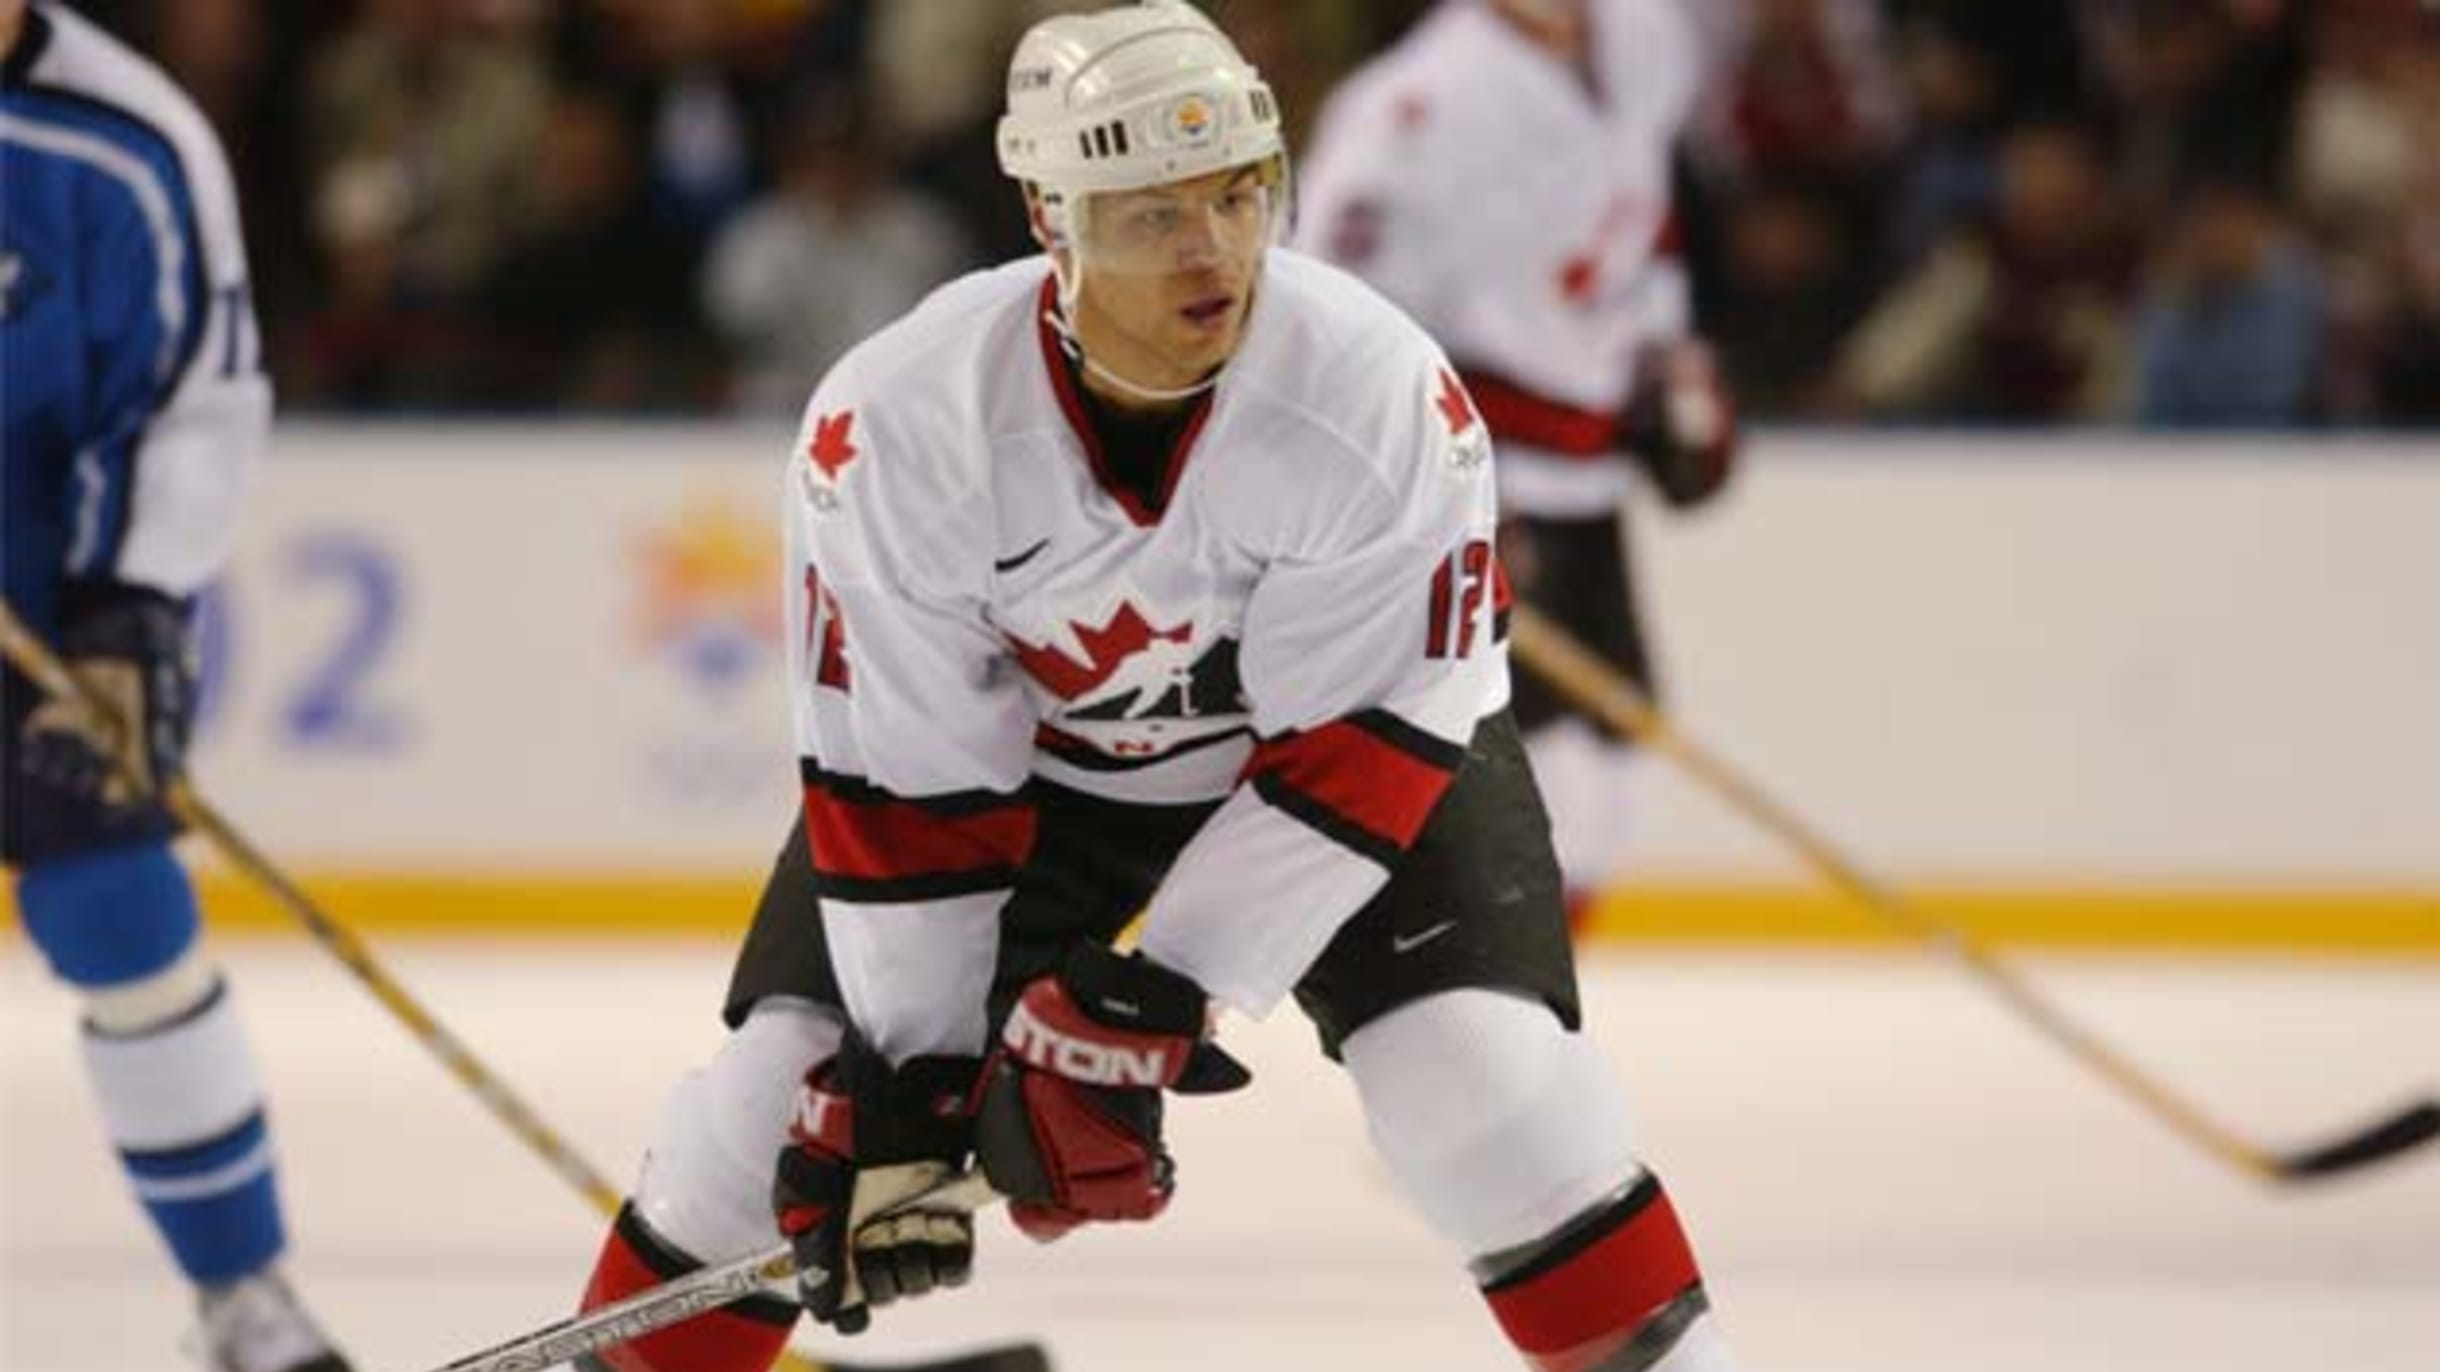 Hockey Canada president: Iginla needs to play for shot at Olympic